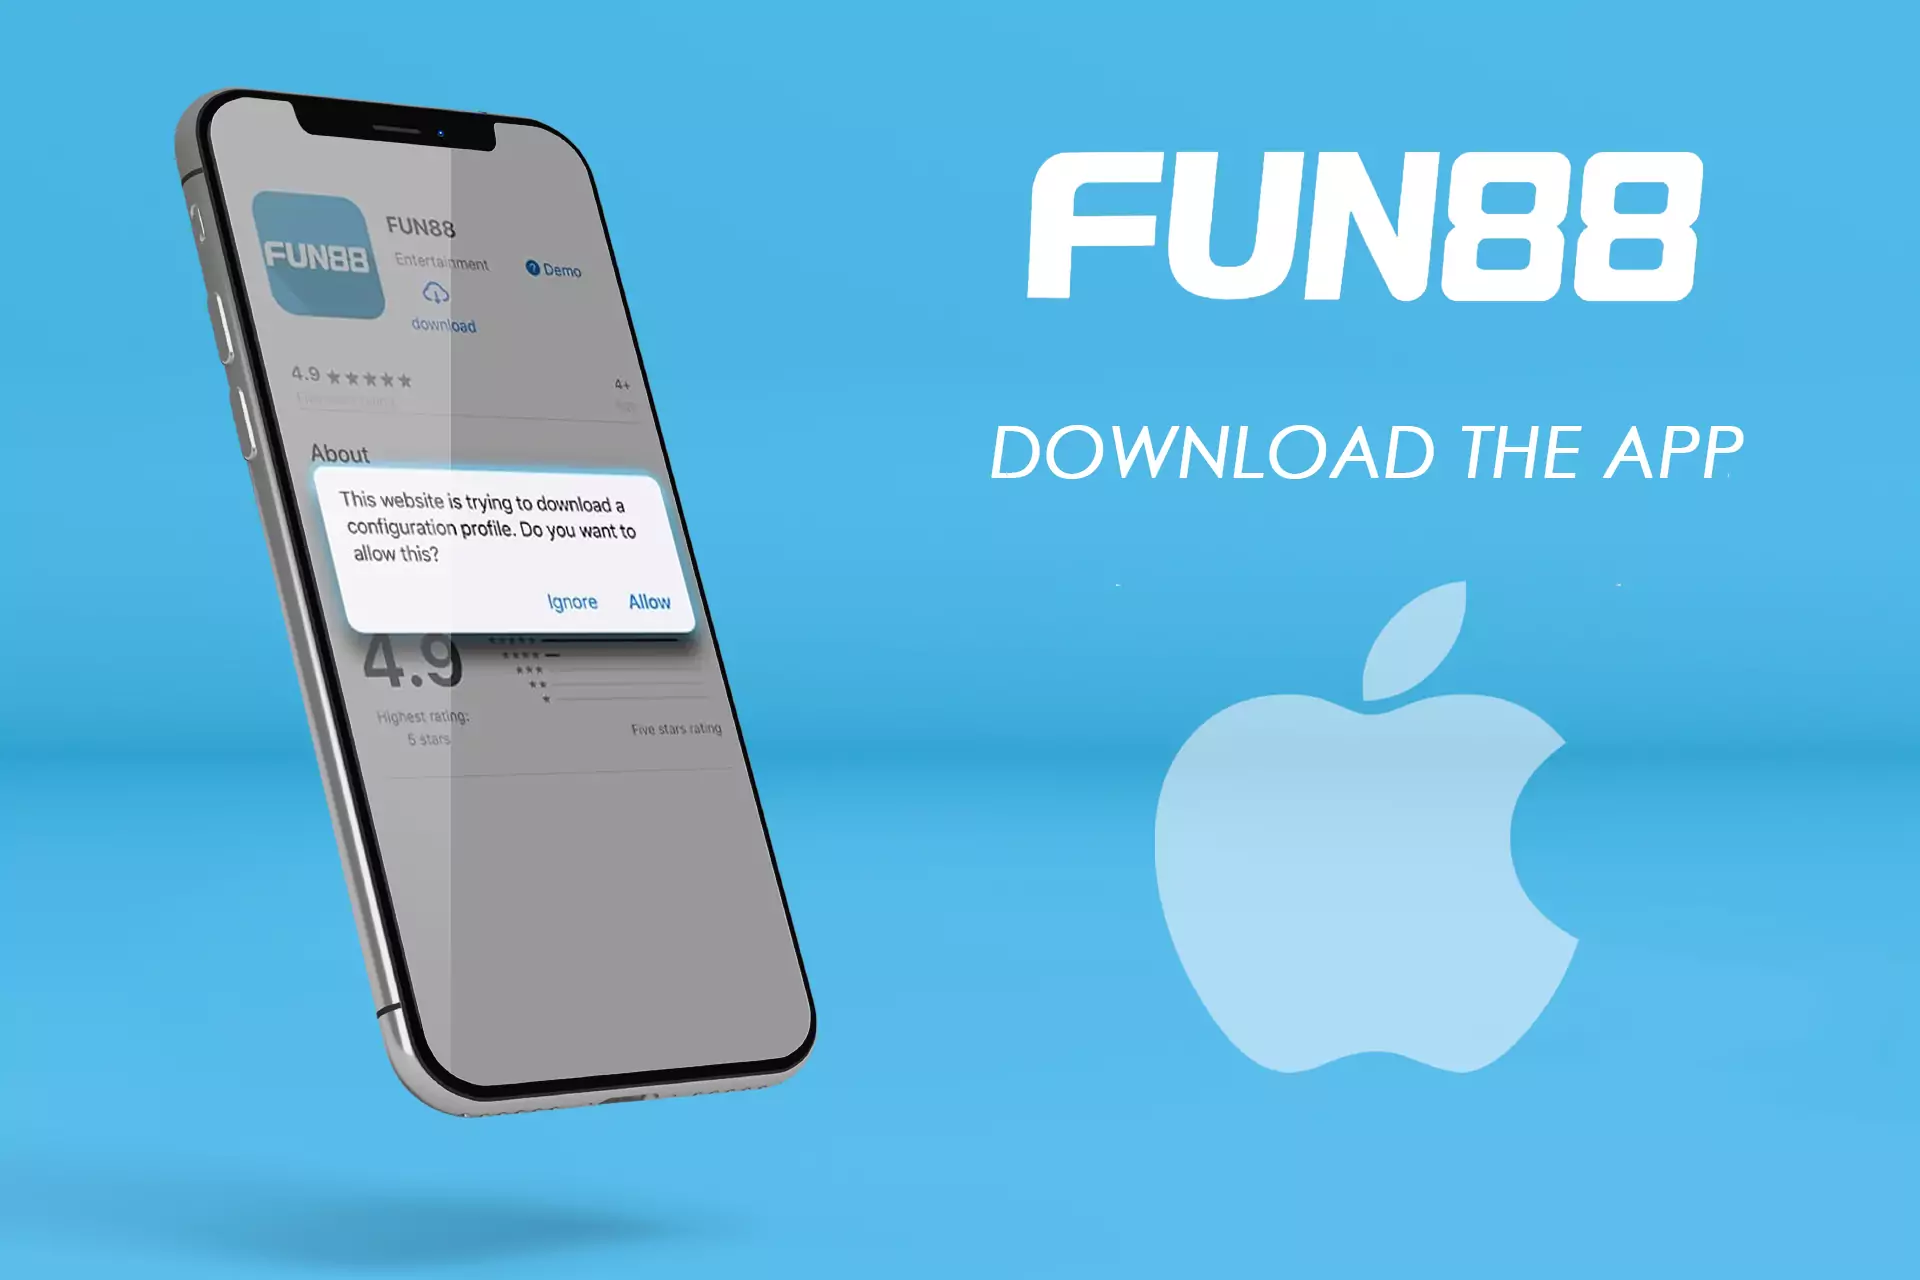 Download the Fun88 application for the iOS platform.